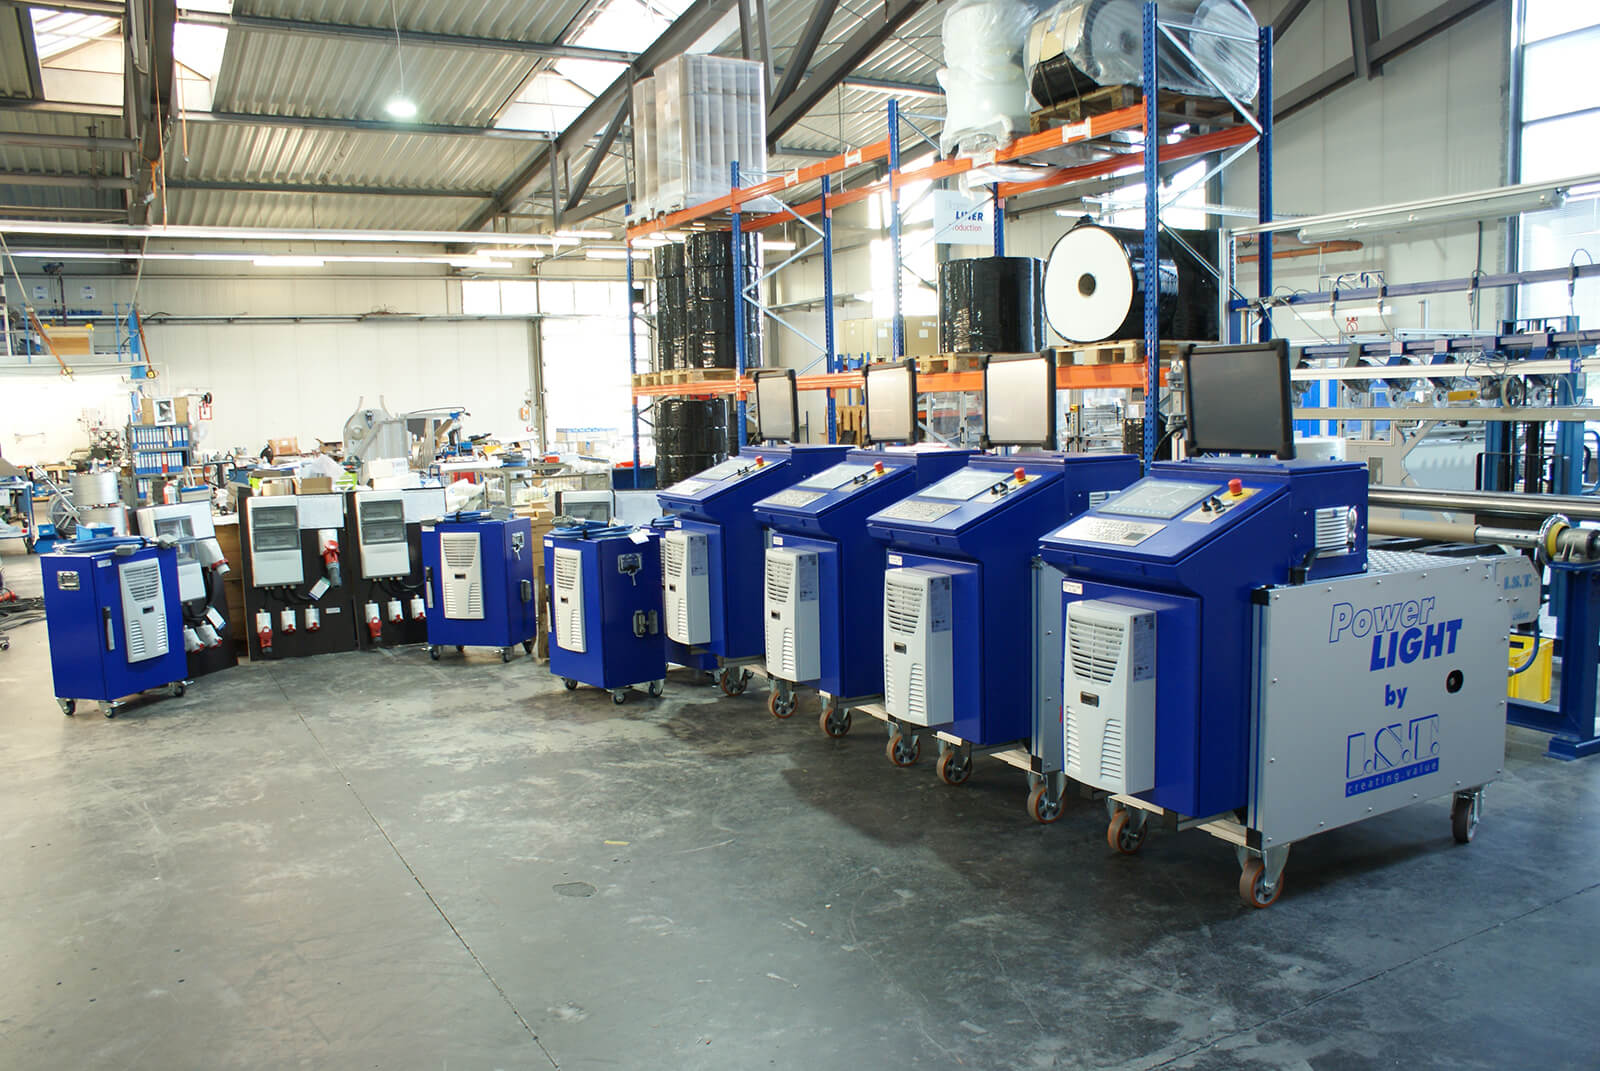 UV compact systems ready for delivery